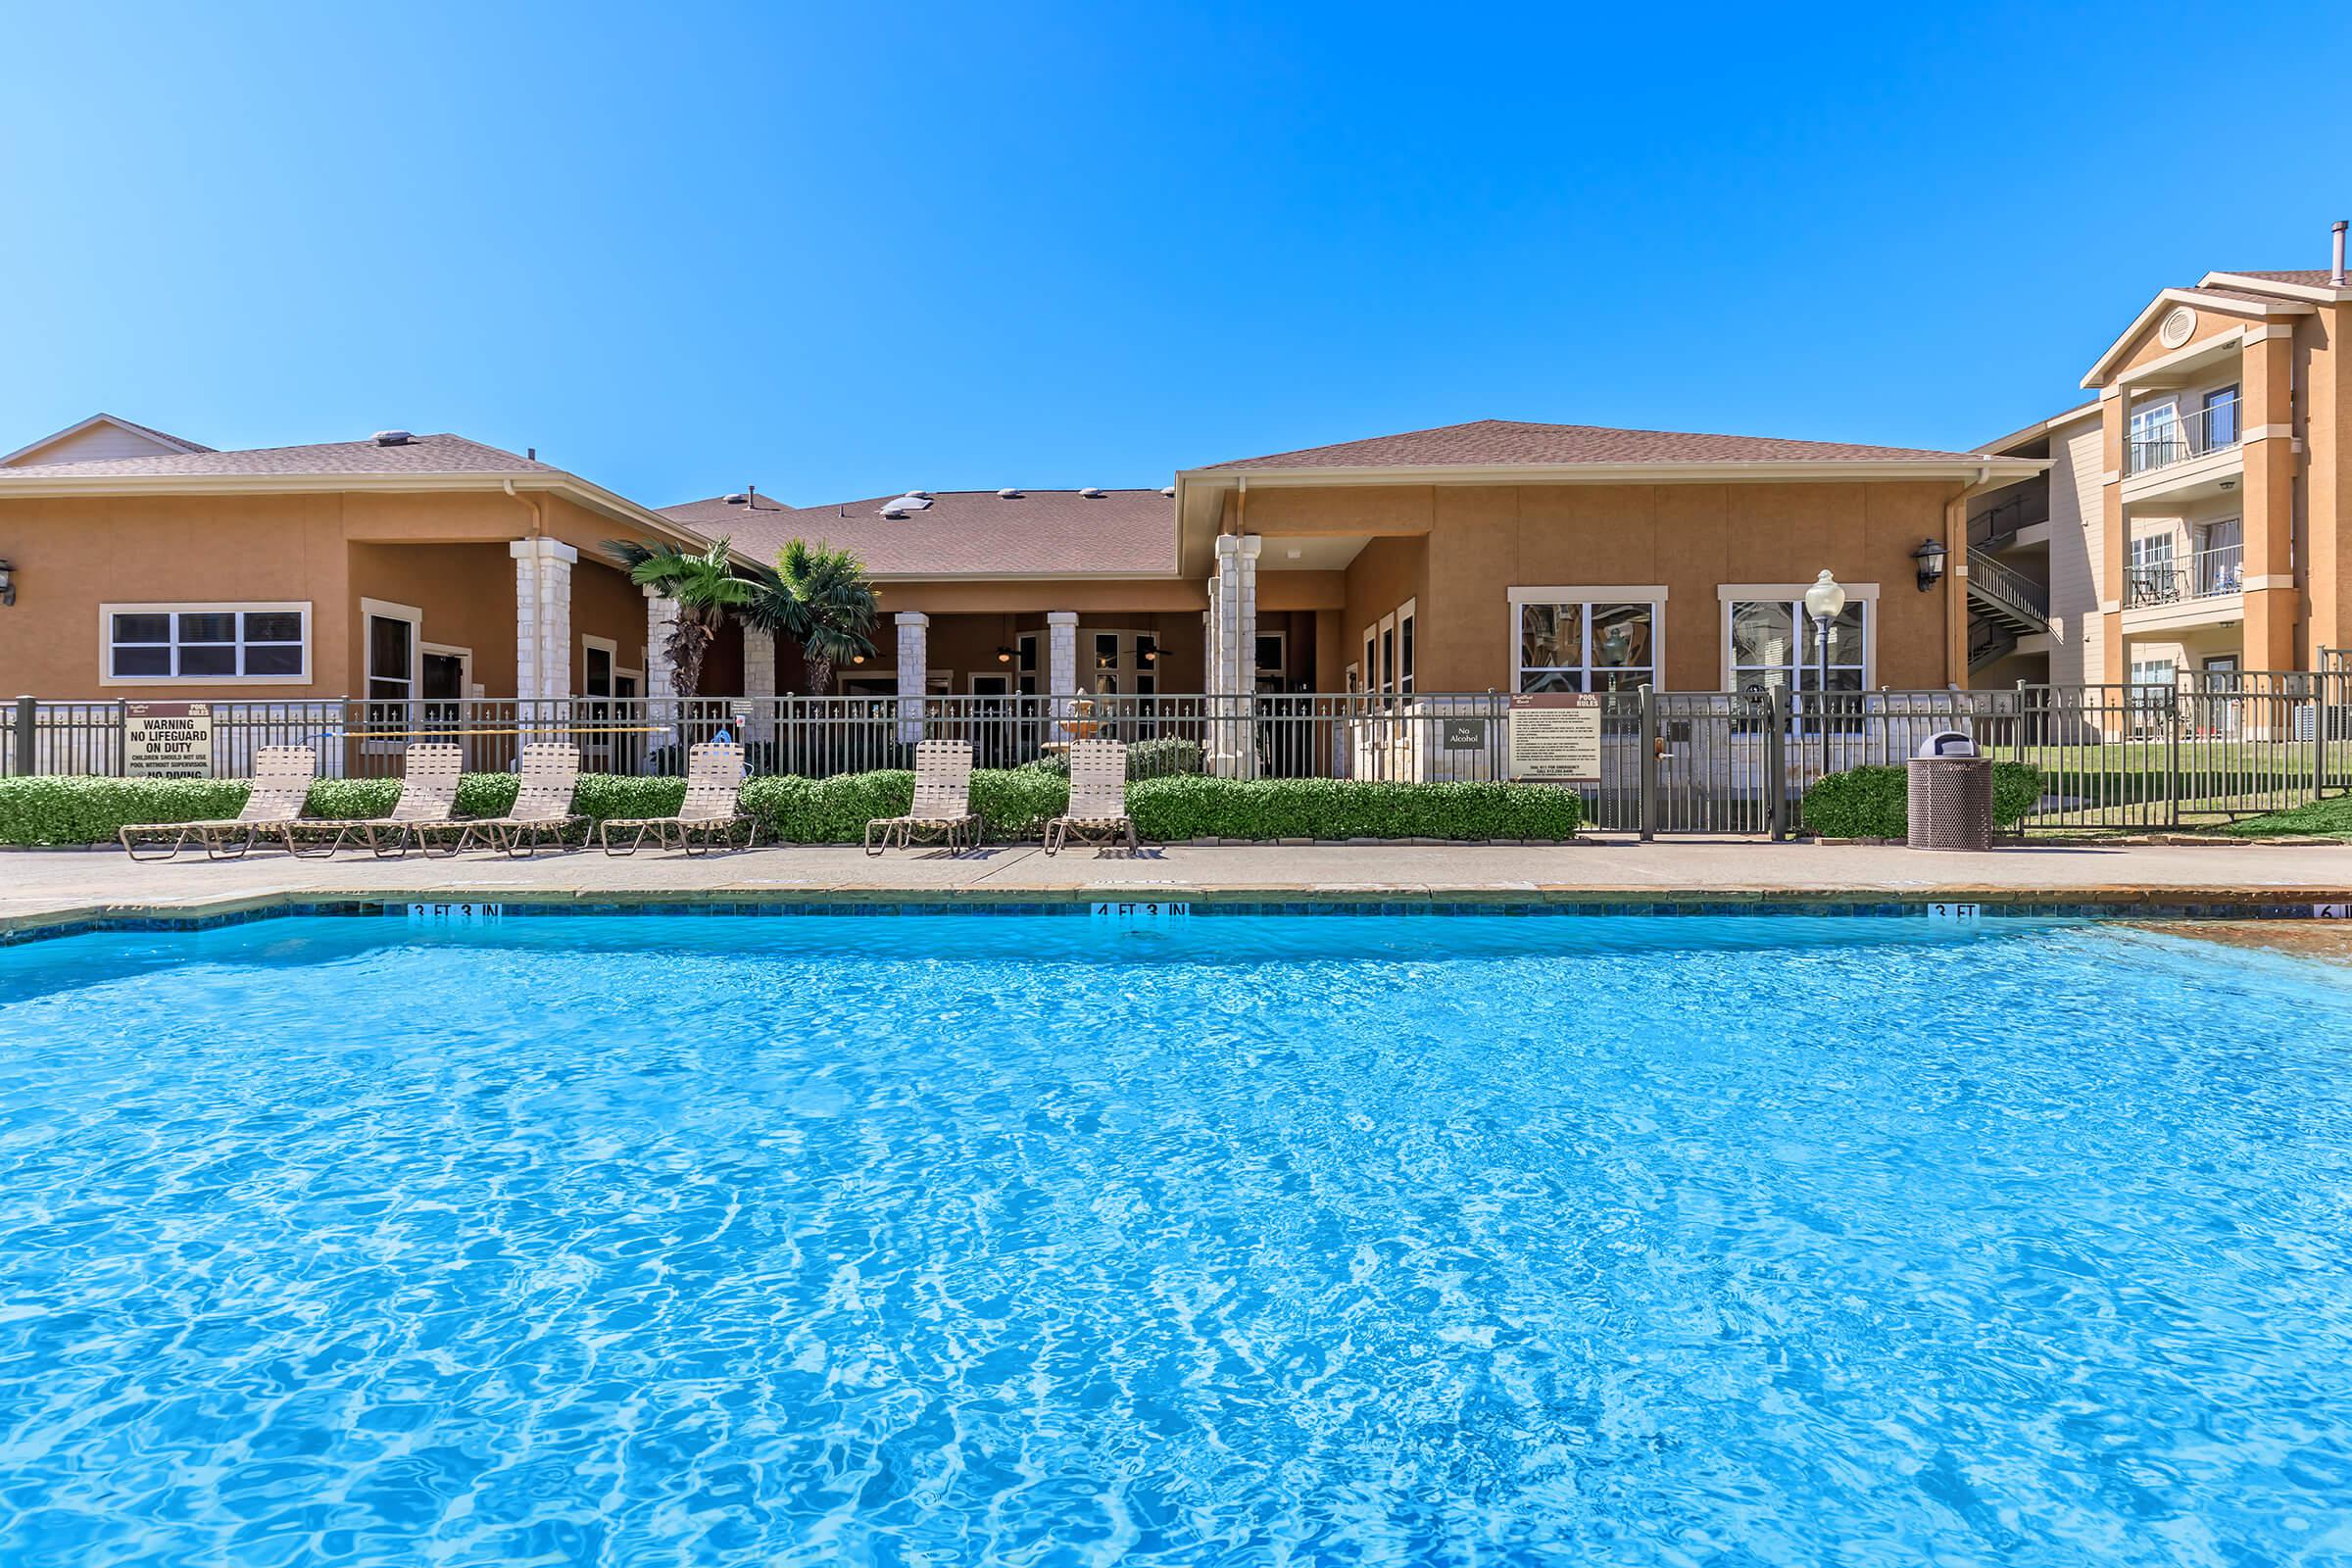 TAKE A DIP IN THE SPARKLING POOK AT SOUTHPARK RANCH APARTMENTS